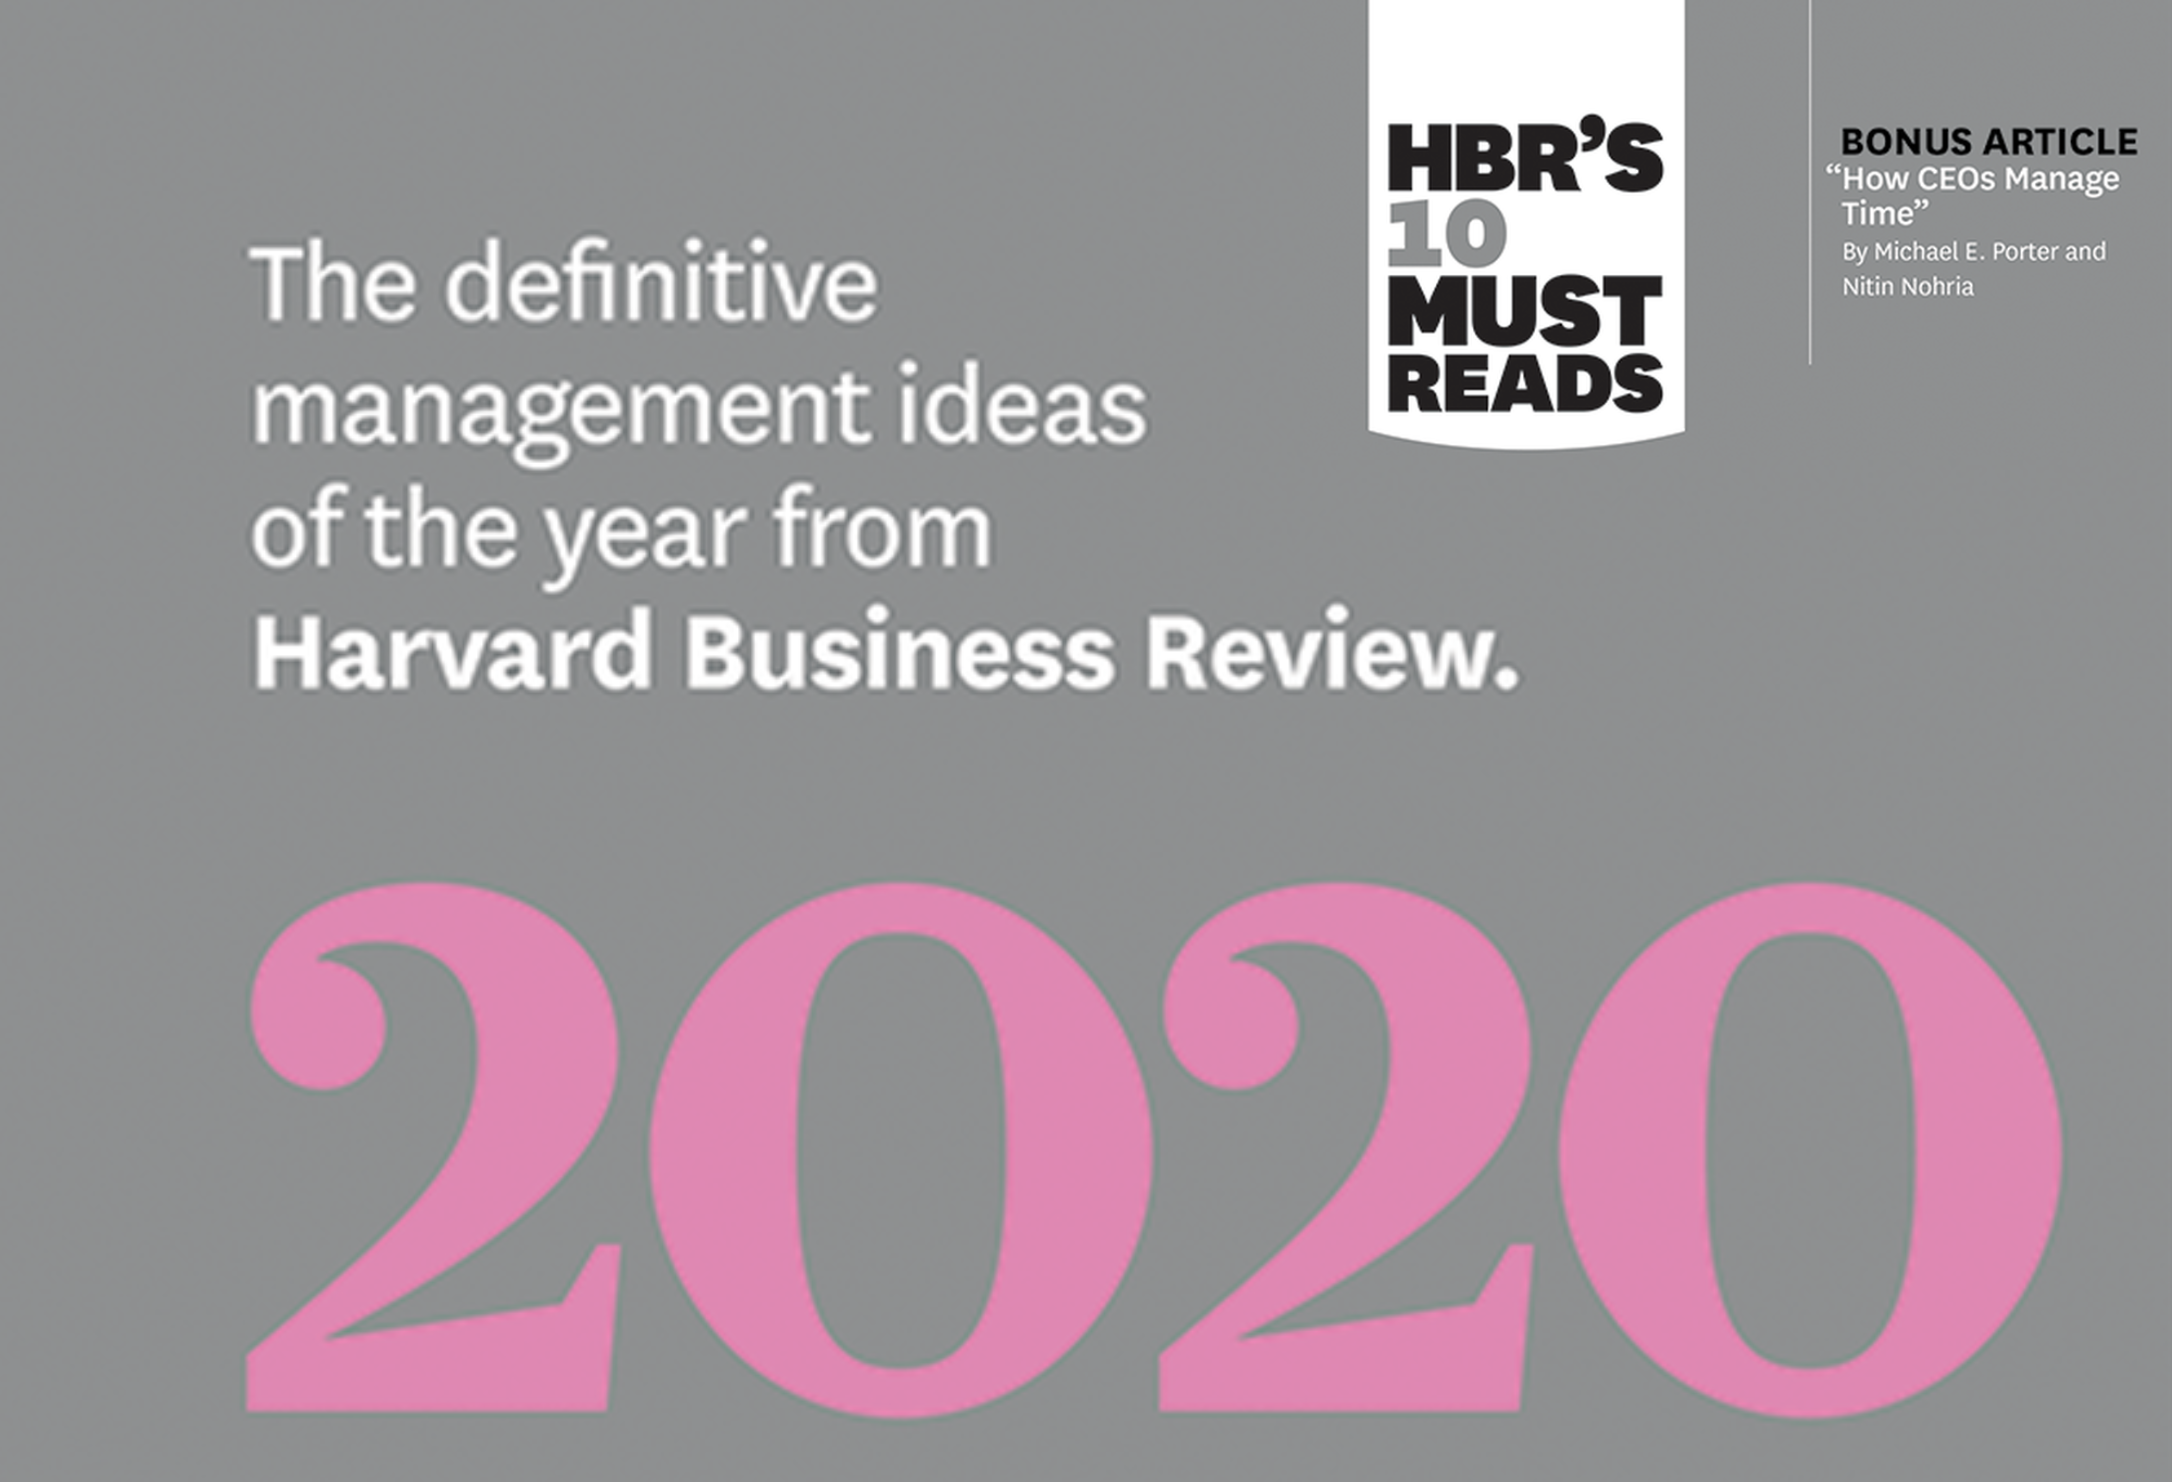 “Strategy for Start-Ups” among HBR’s 10 Must Reads for 2020